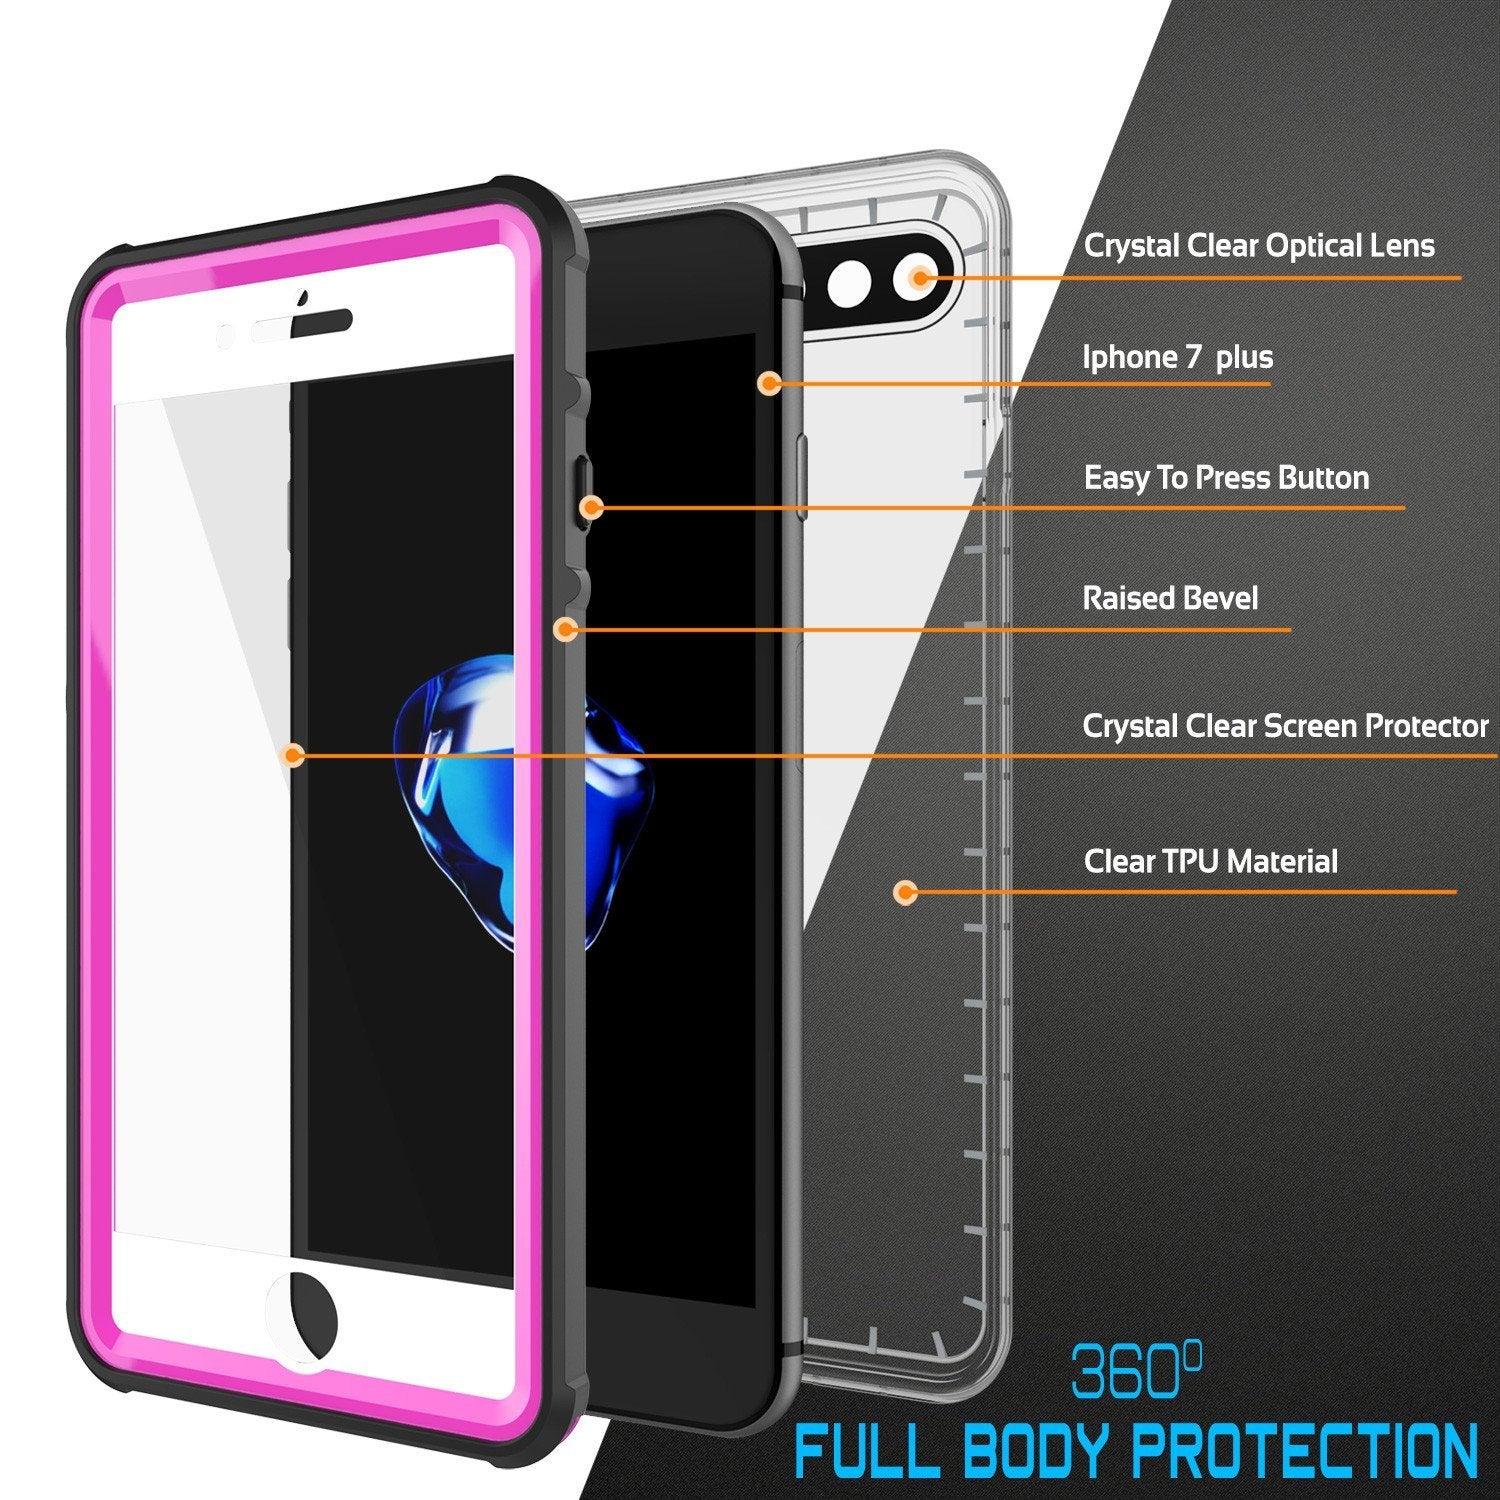 iPhone 8+ Plus Waterproof Case, PUNKcase CRYSTAL Pink W/ Attached Screen Protector  | Warranty